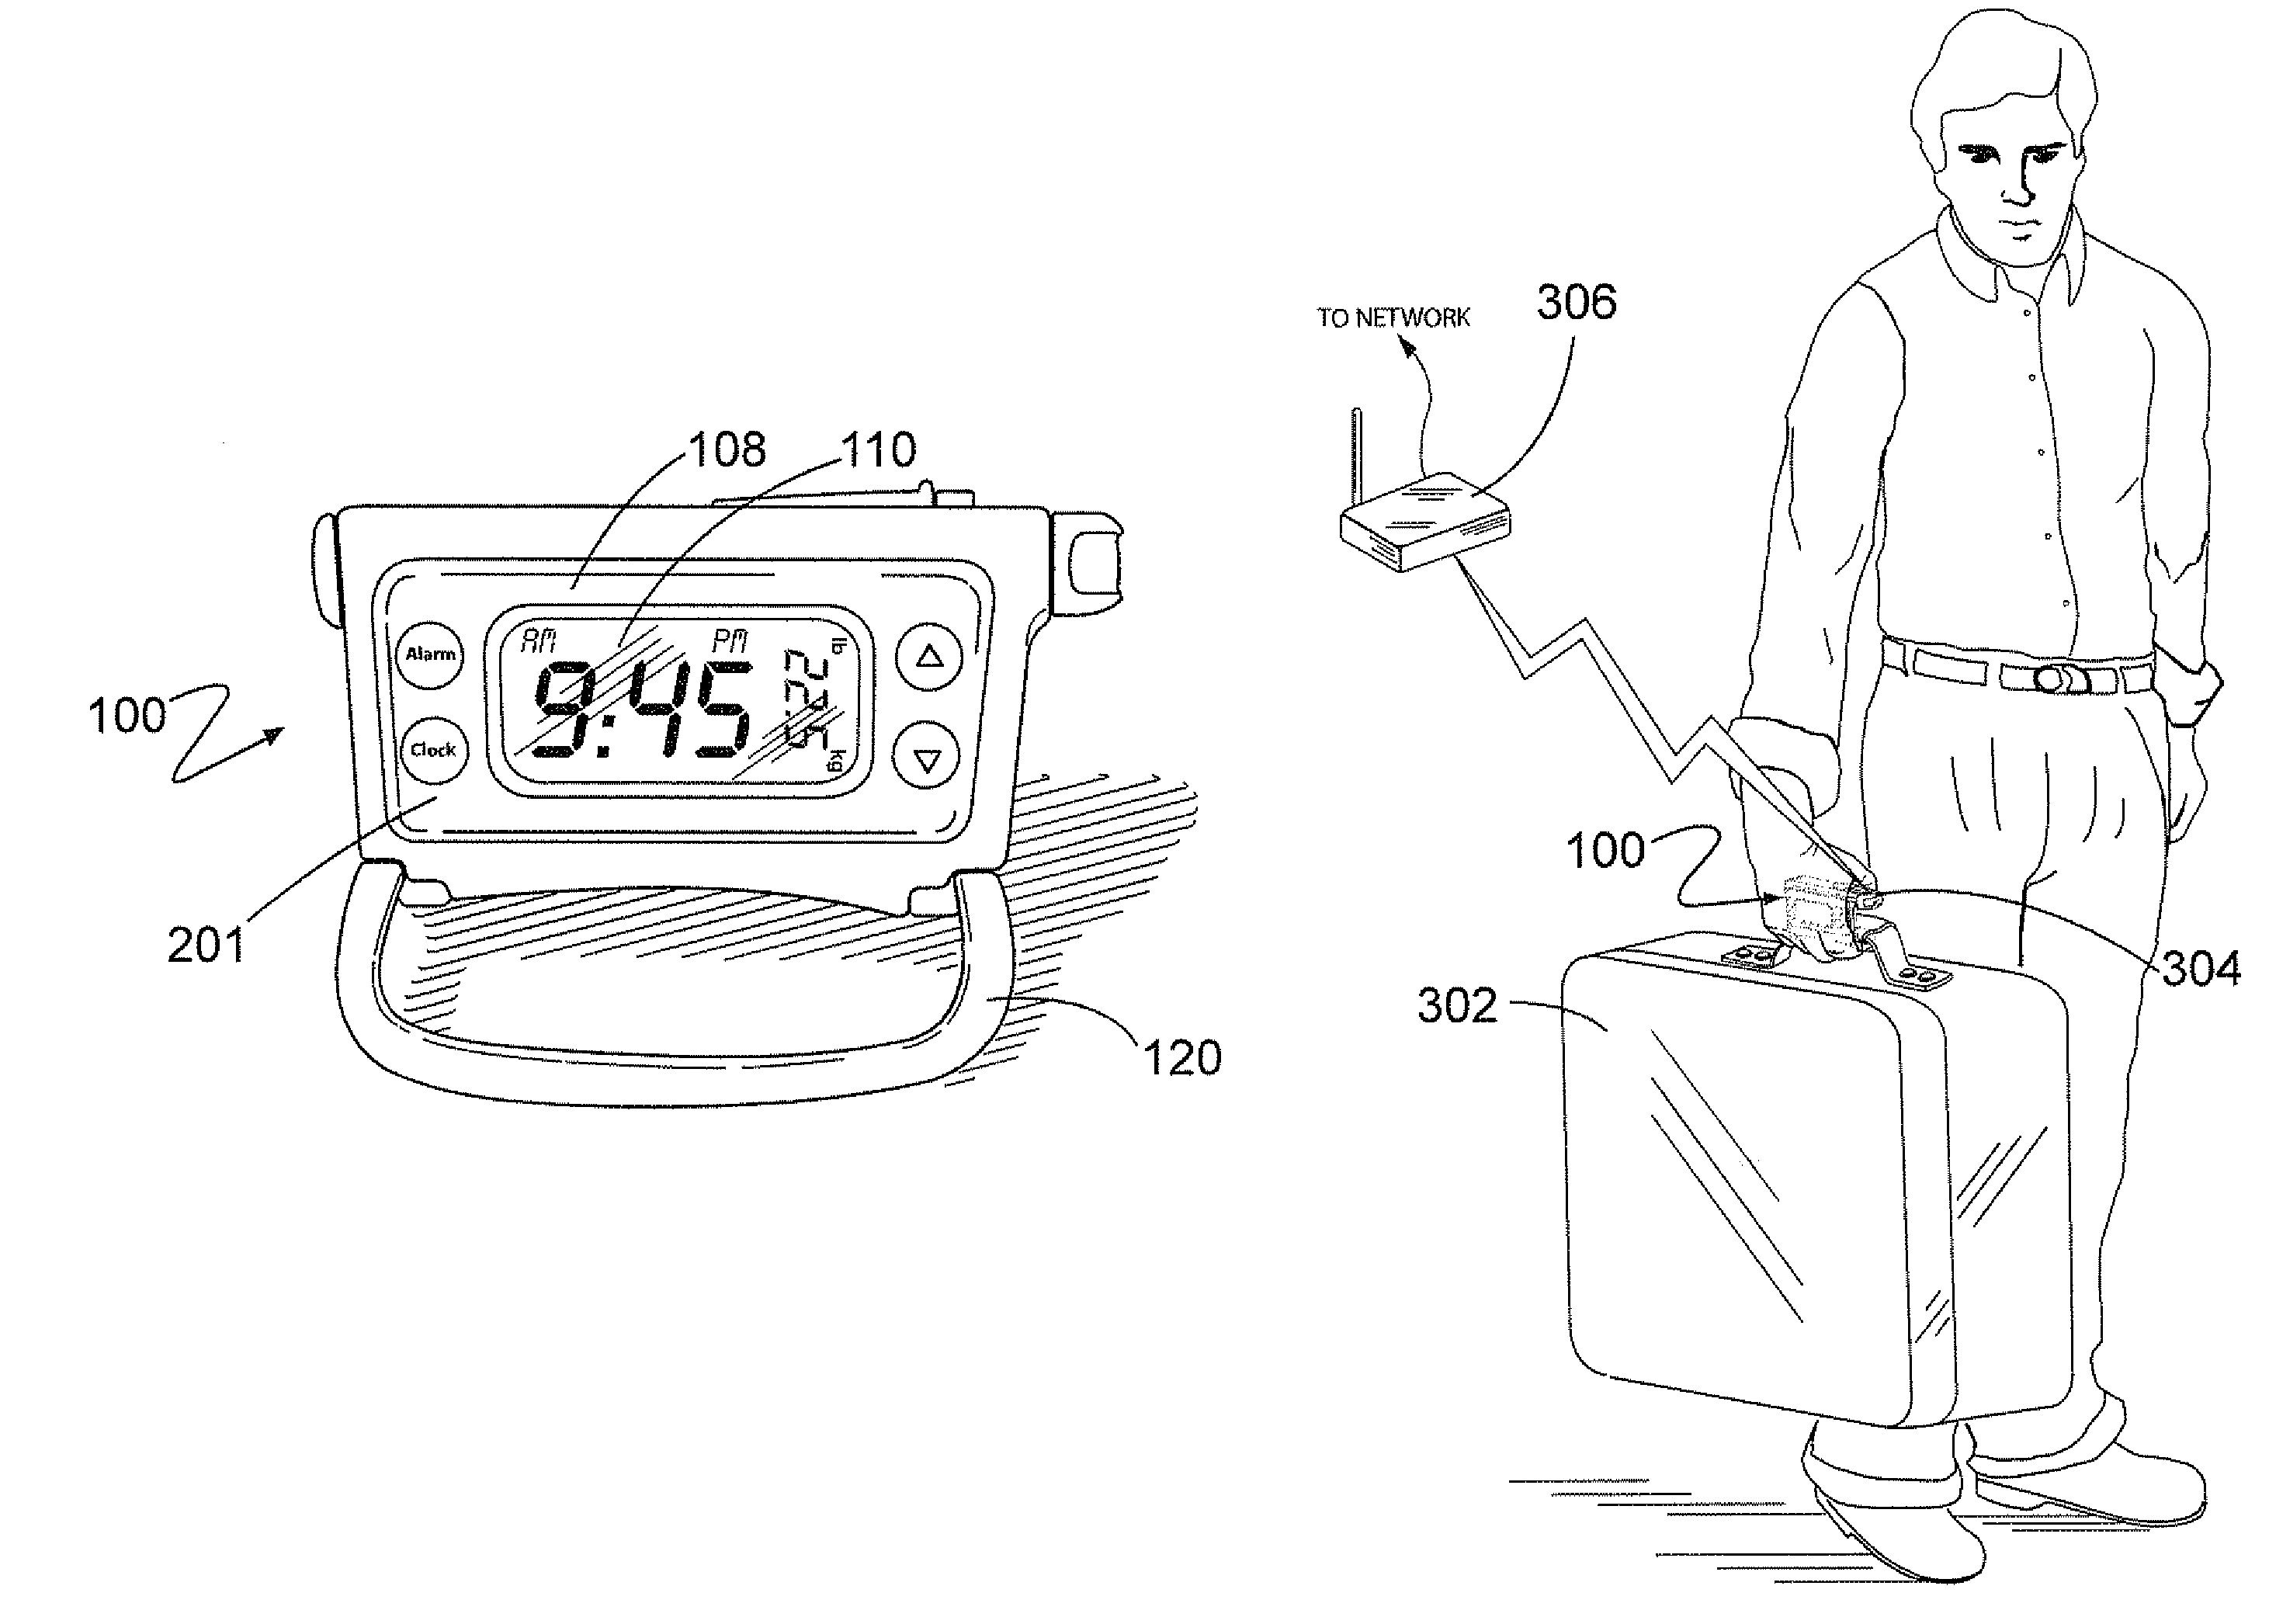 Apparatus and method for measuring luggage weight